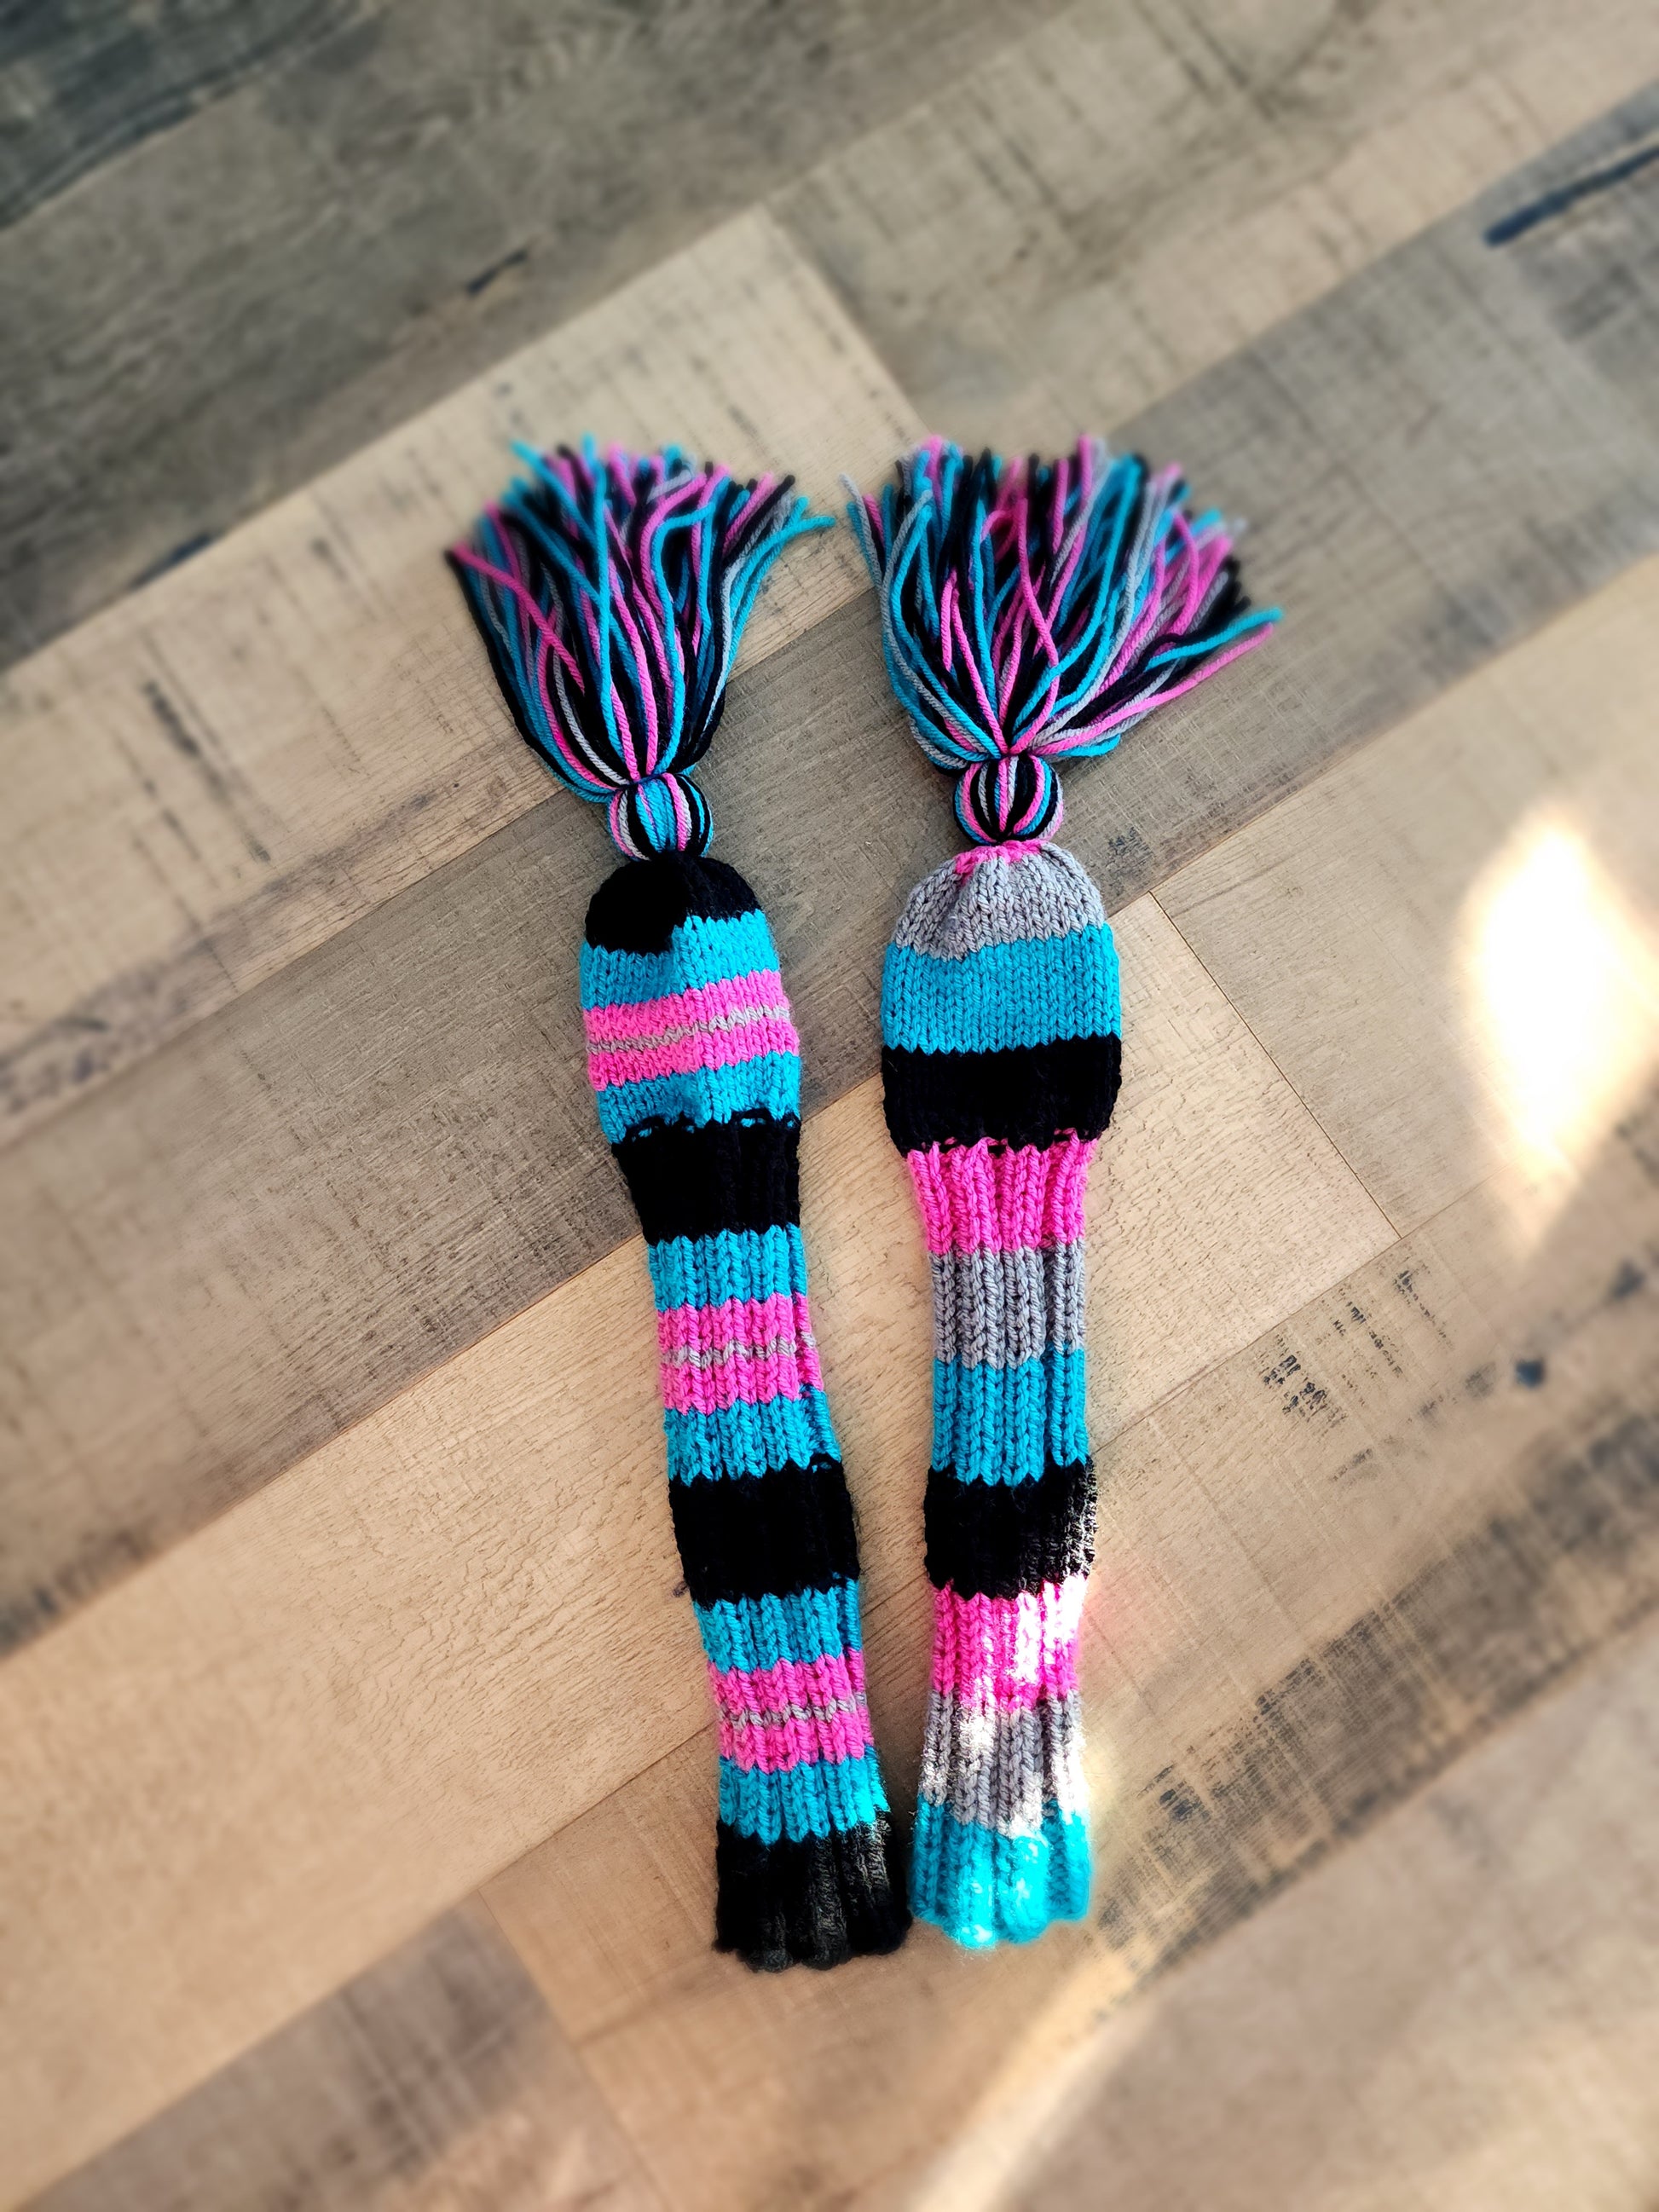 Two Hand Knit Golf Club Head Covers Retro-Vintage Black, Teal, Pink &Gray with Tassels for Fairway Woods - Austinknittylimits